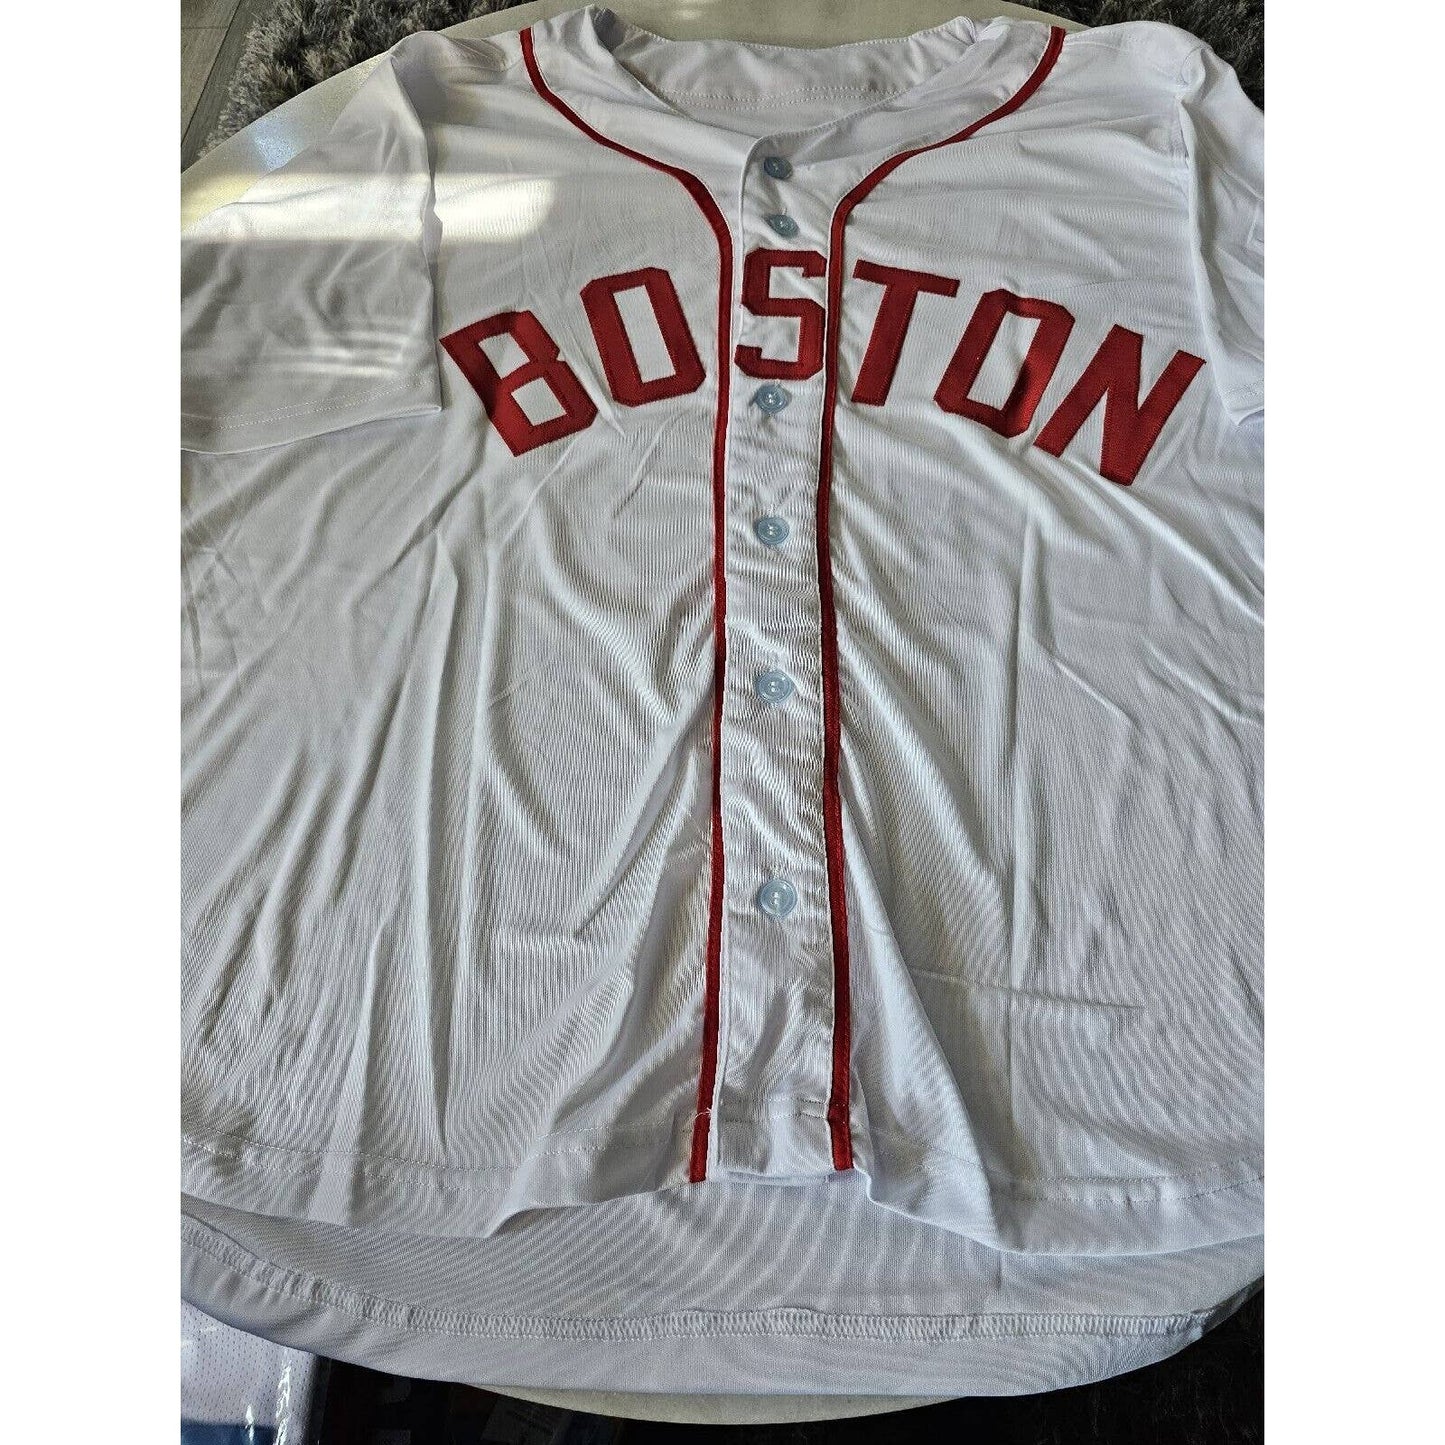 Jim Lonborg Autographed/Signed Jersey Beckett Sticker Boston Red Sox